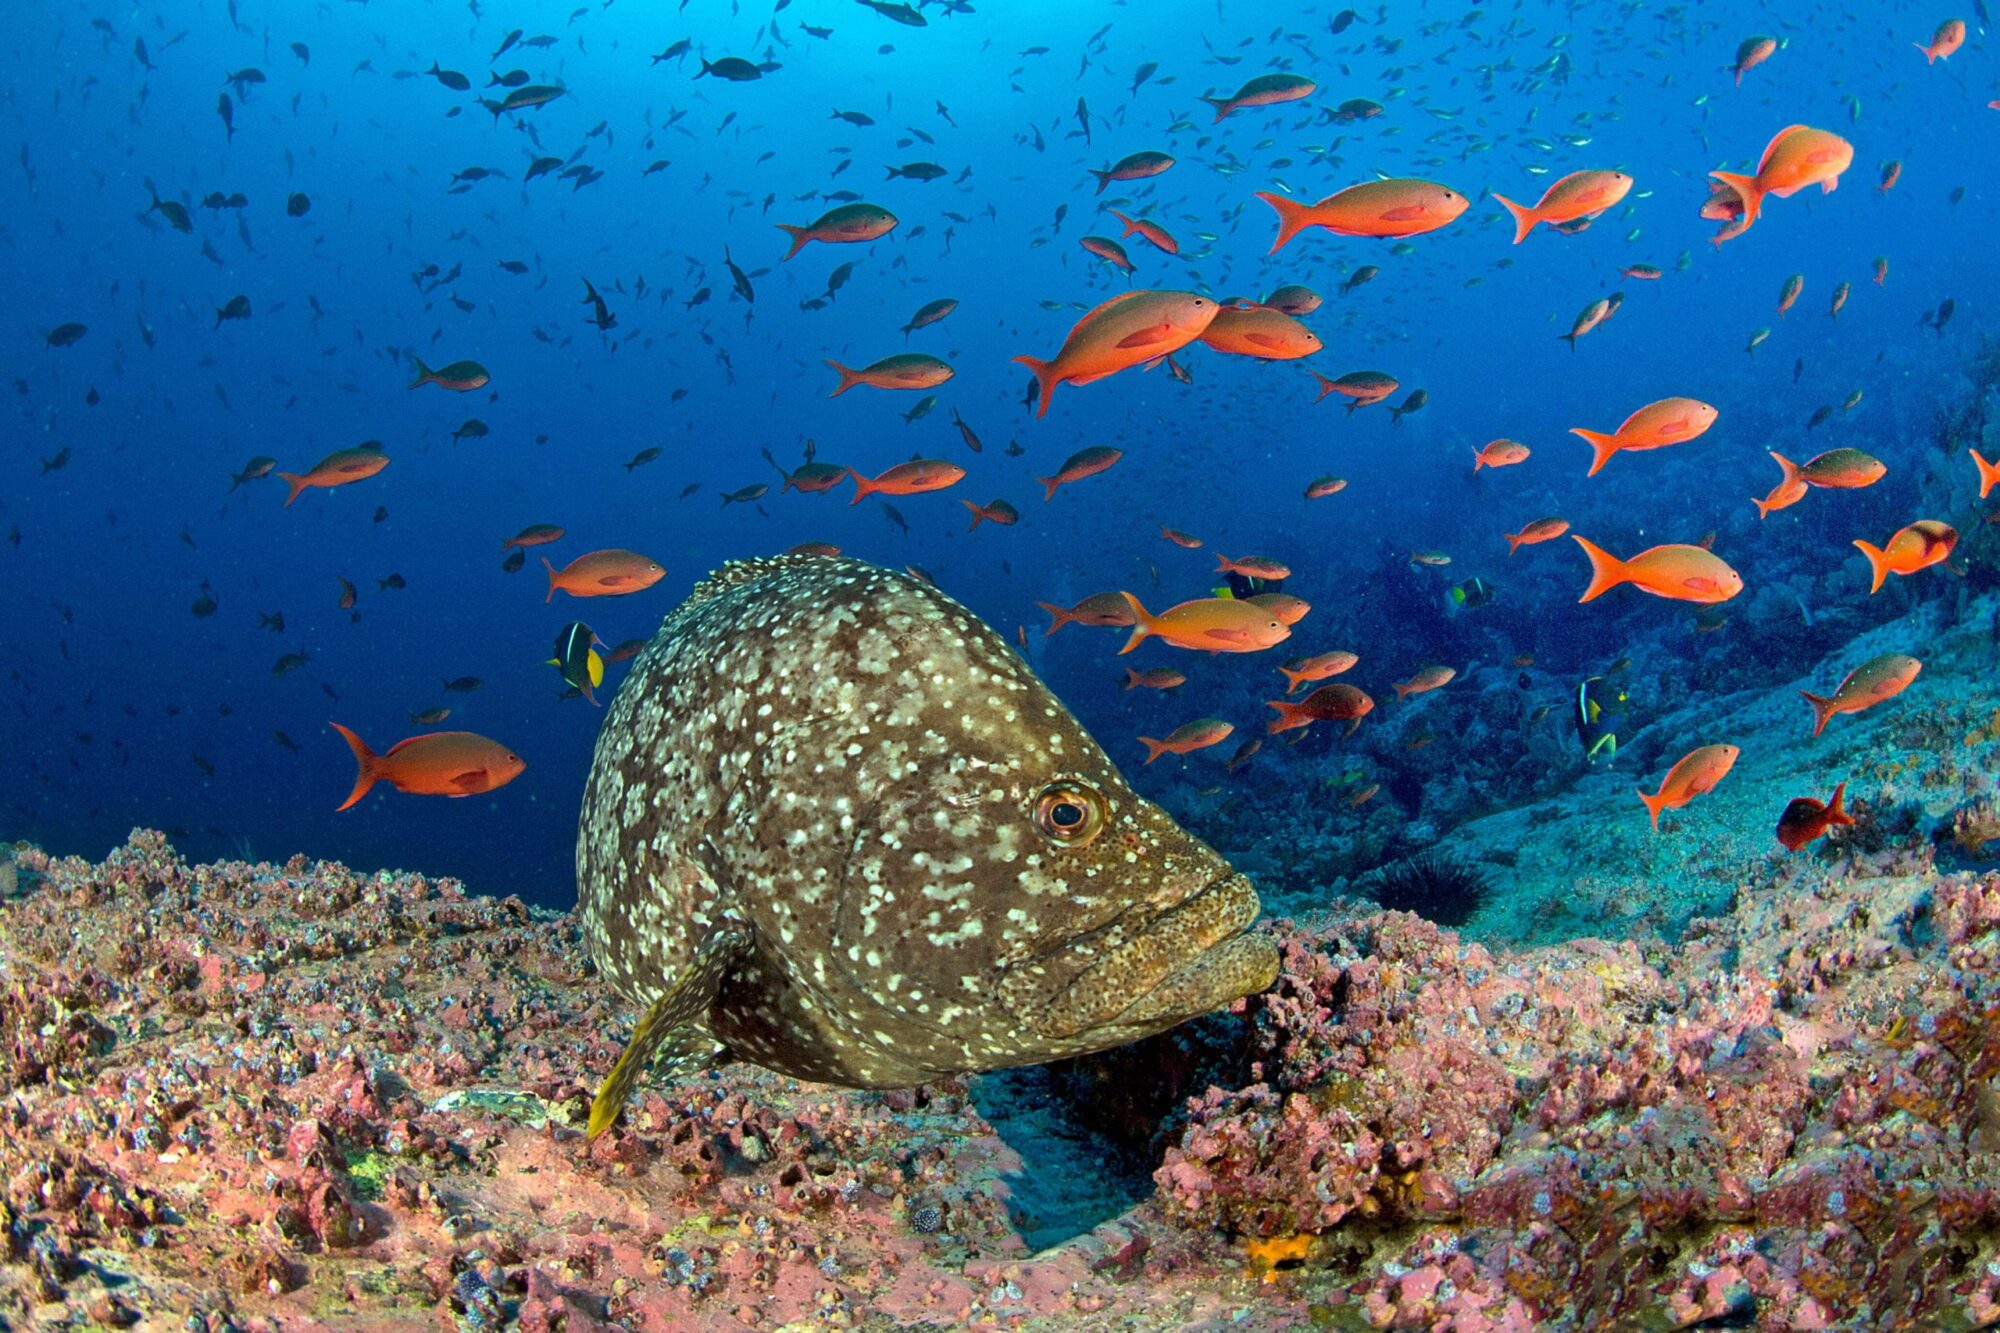 A marbled grouper in the teeming waters off Malpelo